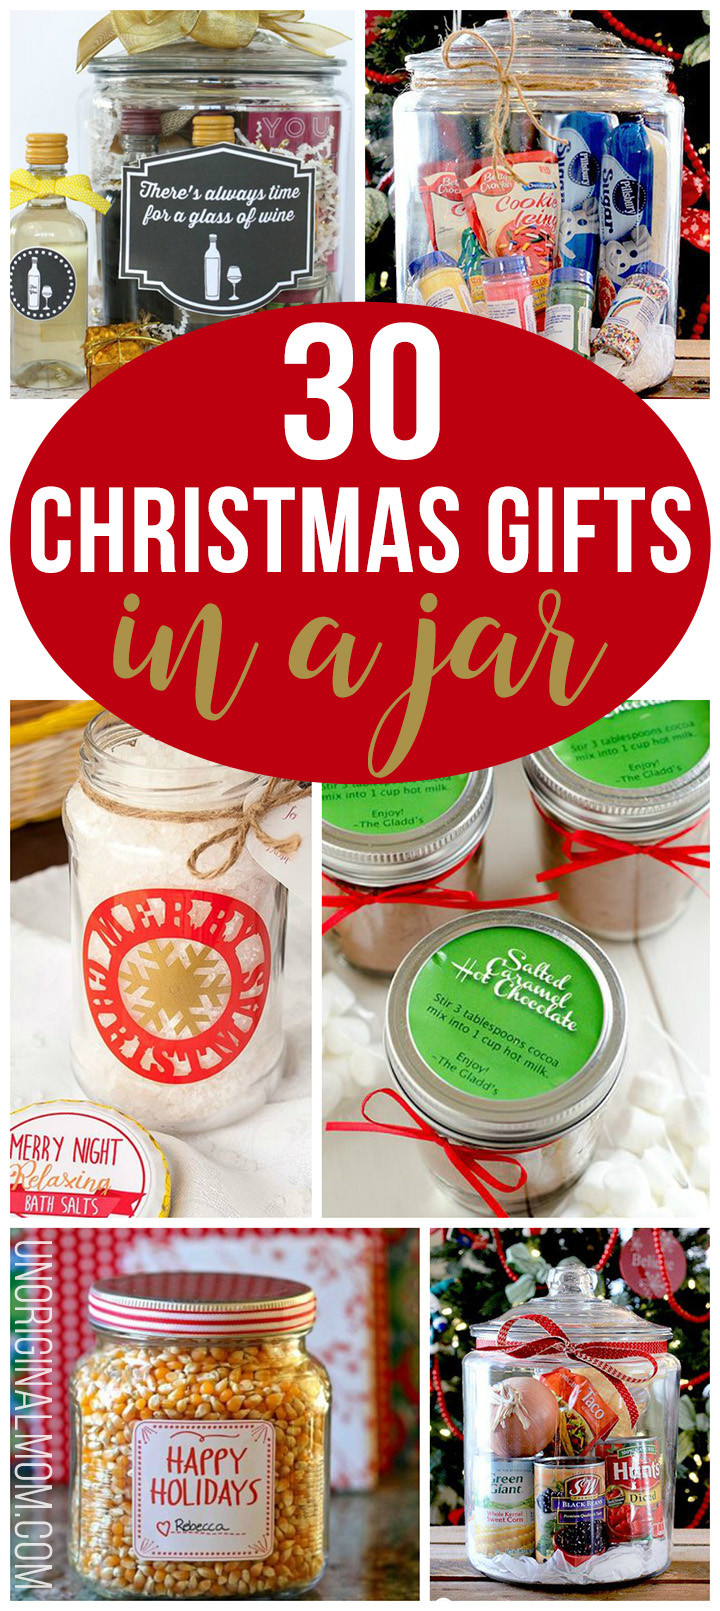 Cool Holiday Gift Ideas
 30 Christmas Gifts in a Jar unOriginal Mom